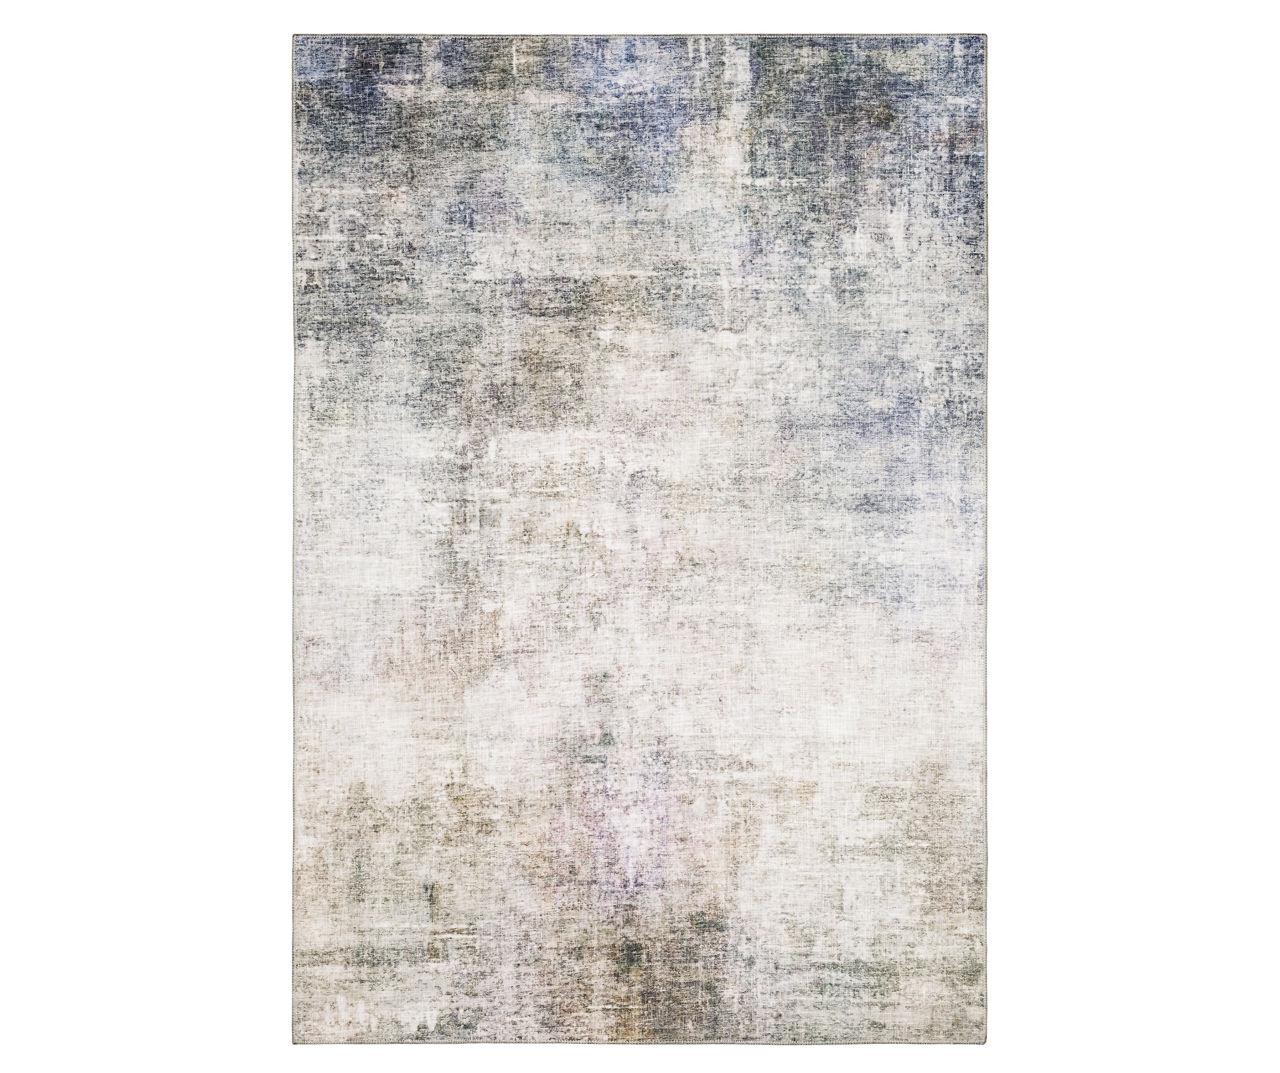 Mykell Beige & Blue Abstract Area Rug, (5' x 7')